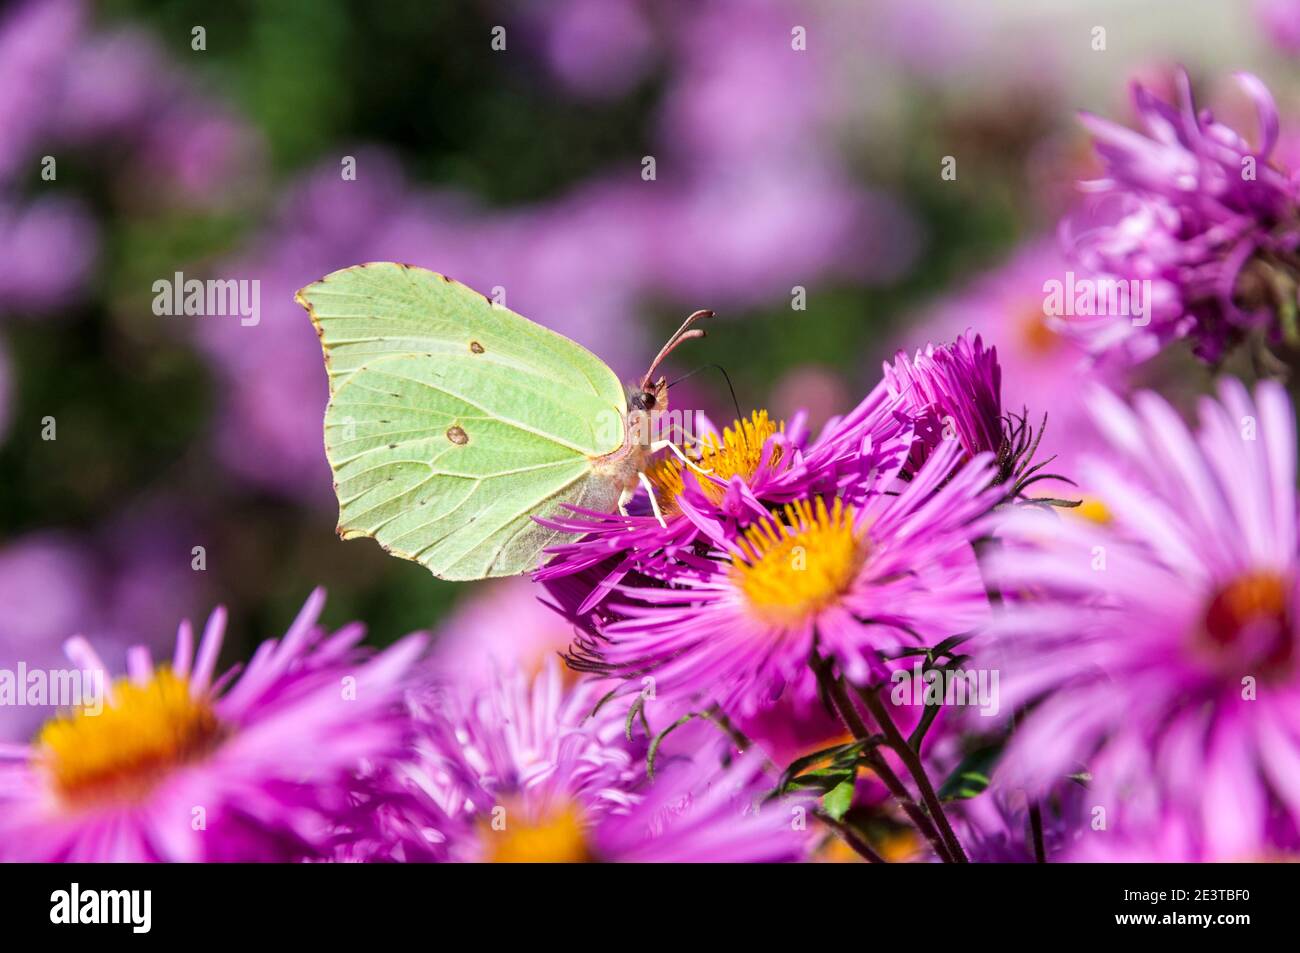 An adult brimstone butterfly (Gonepteryx rhamni) feeding on cultivated flowers at Forbach, Germany. September. Stock Photo